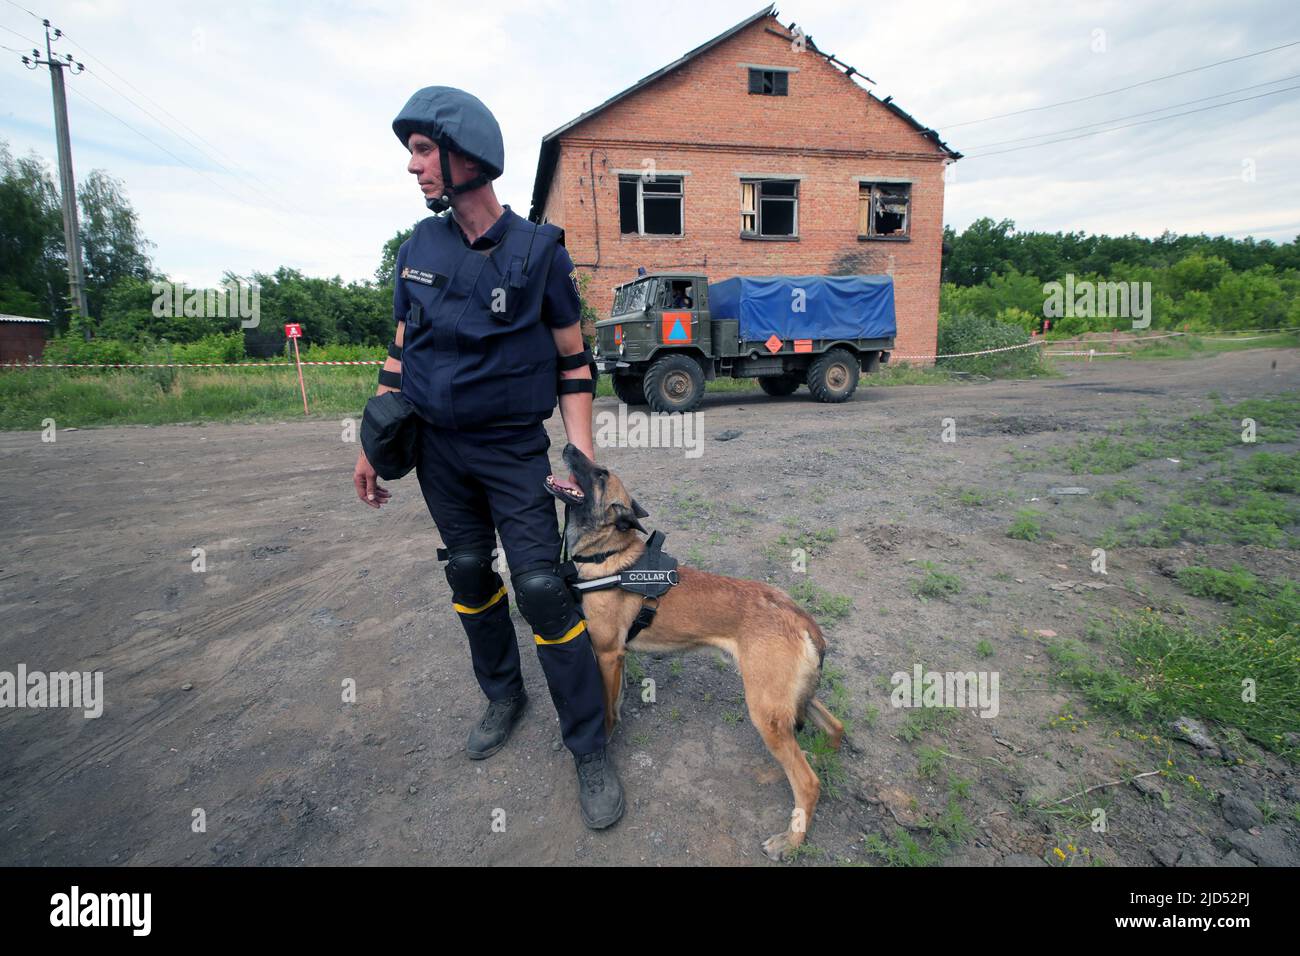 TROSTIANETS, UKRAINE - JUNE 17, 2022 - A rescuer and an explosive detection dog stay at a brick plant where lots of ammunition and other explosive ite Stock Photo